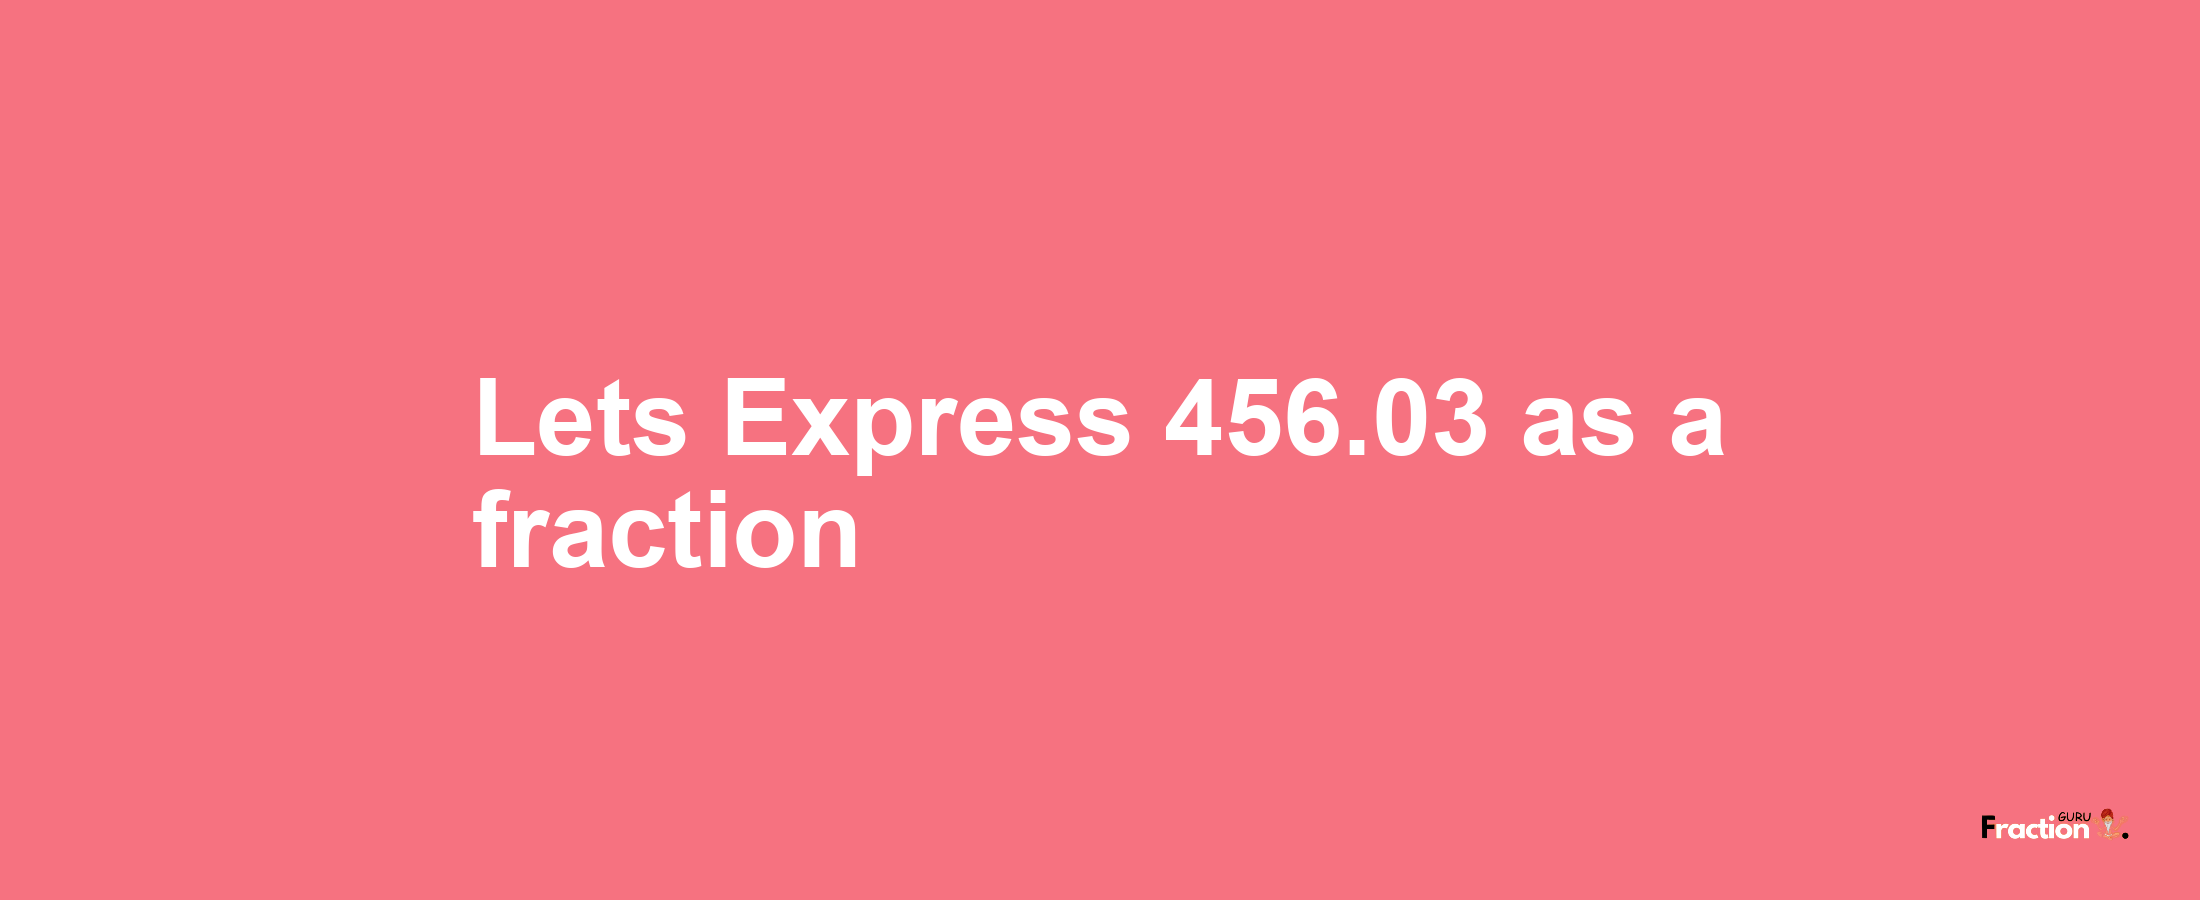 Lets Express 456.03 as afraction